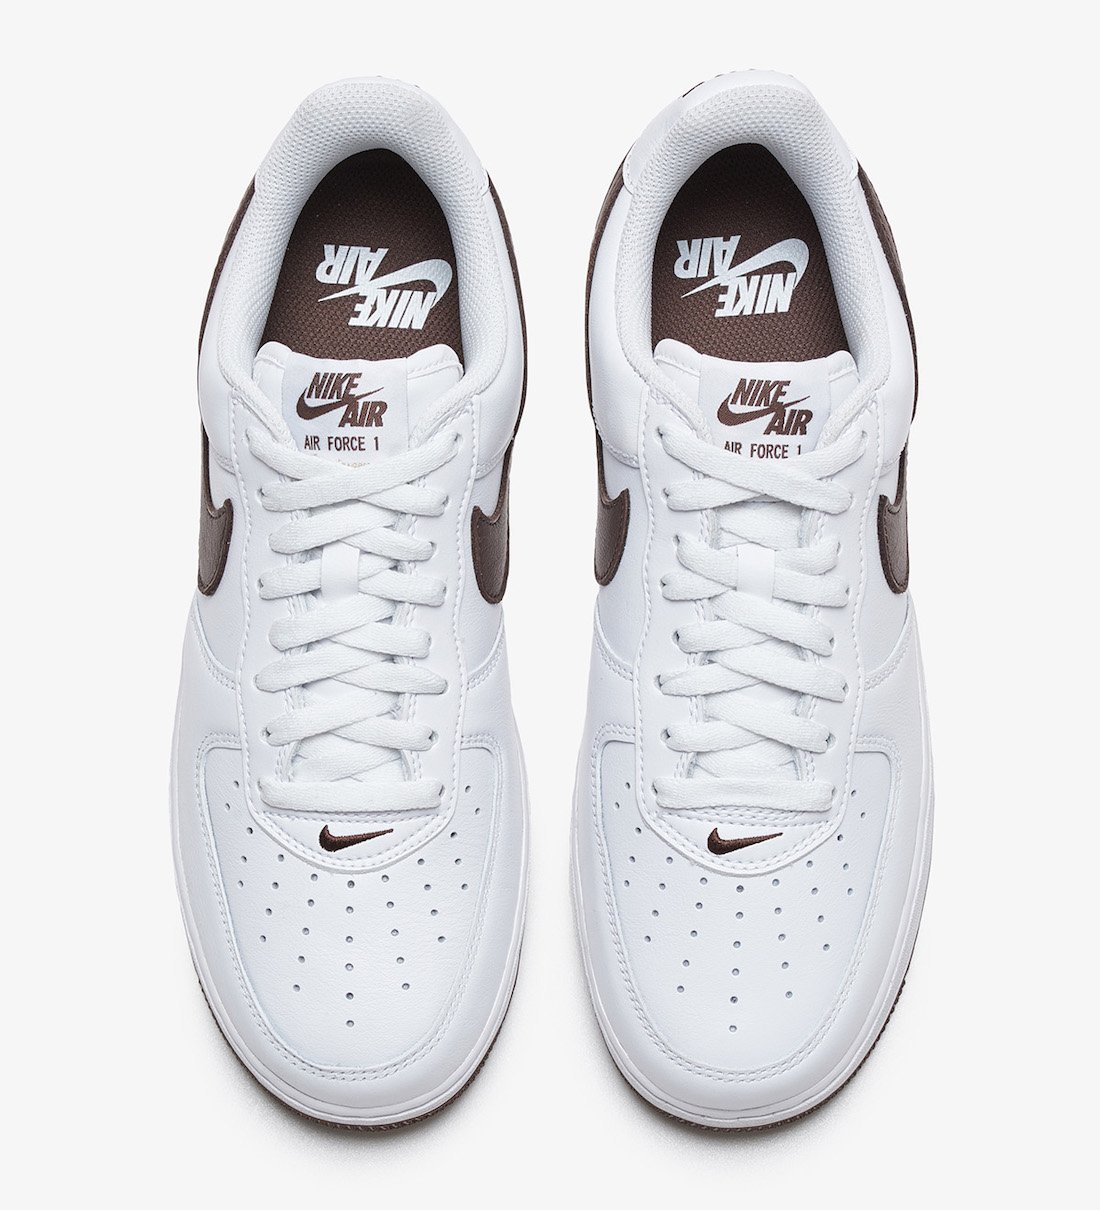 Nike Air Force 1 White Chocolate DM0576-100 Release Date Info